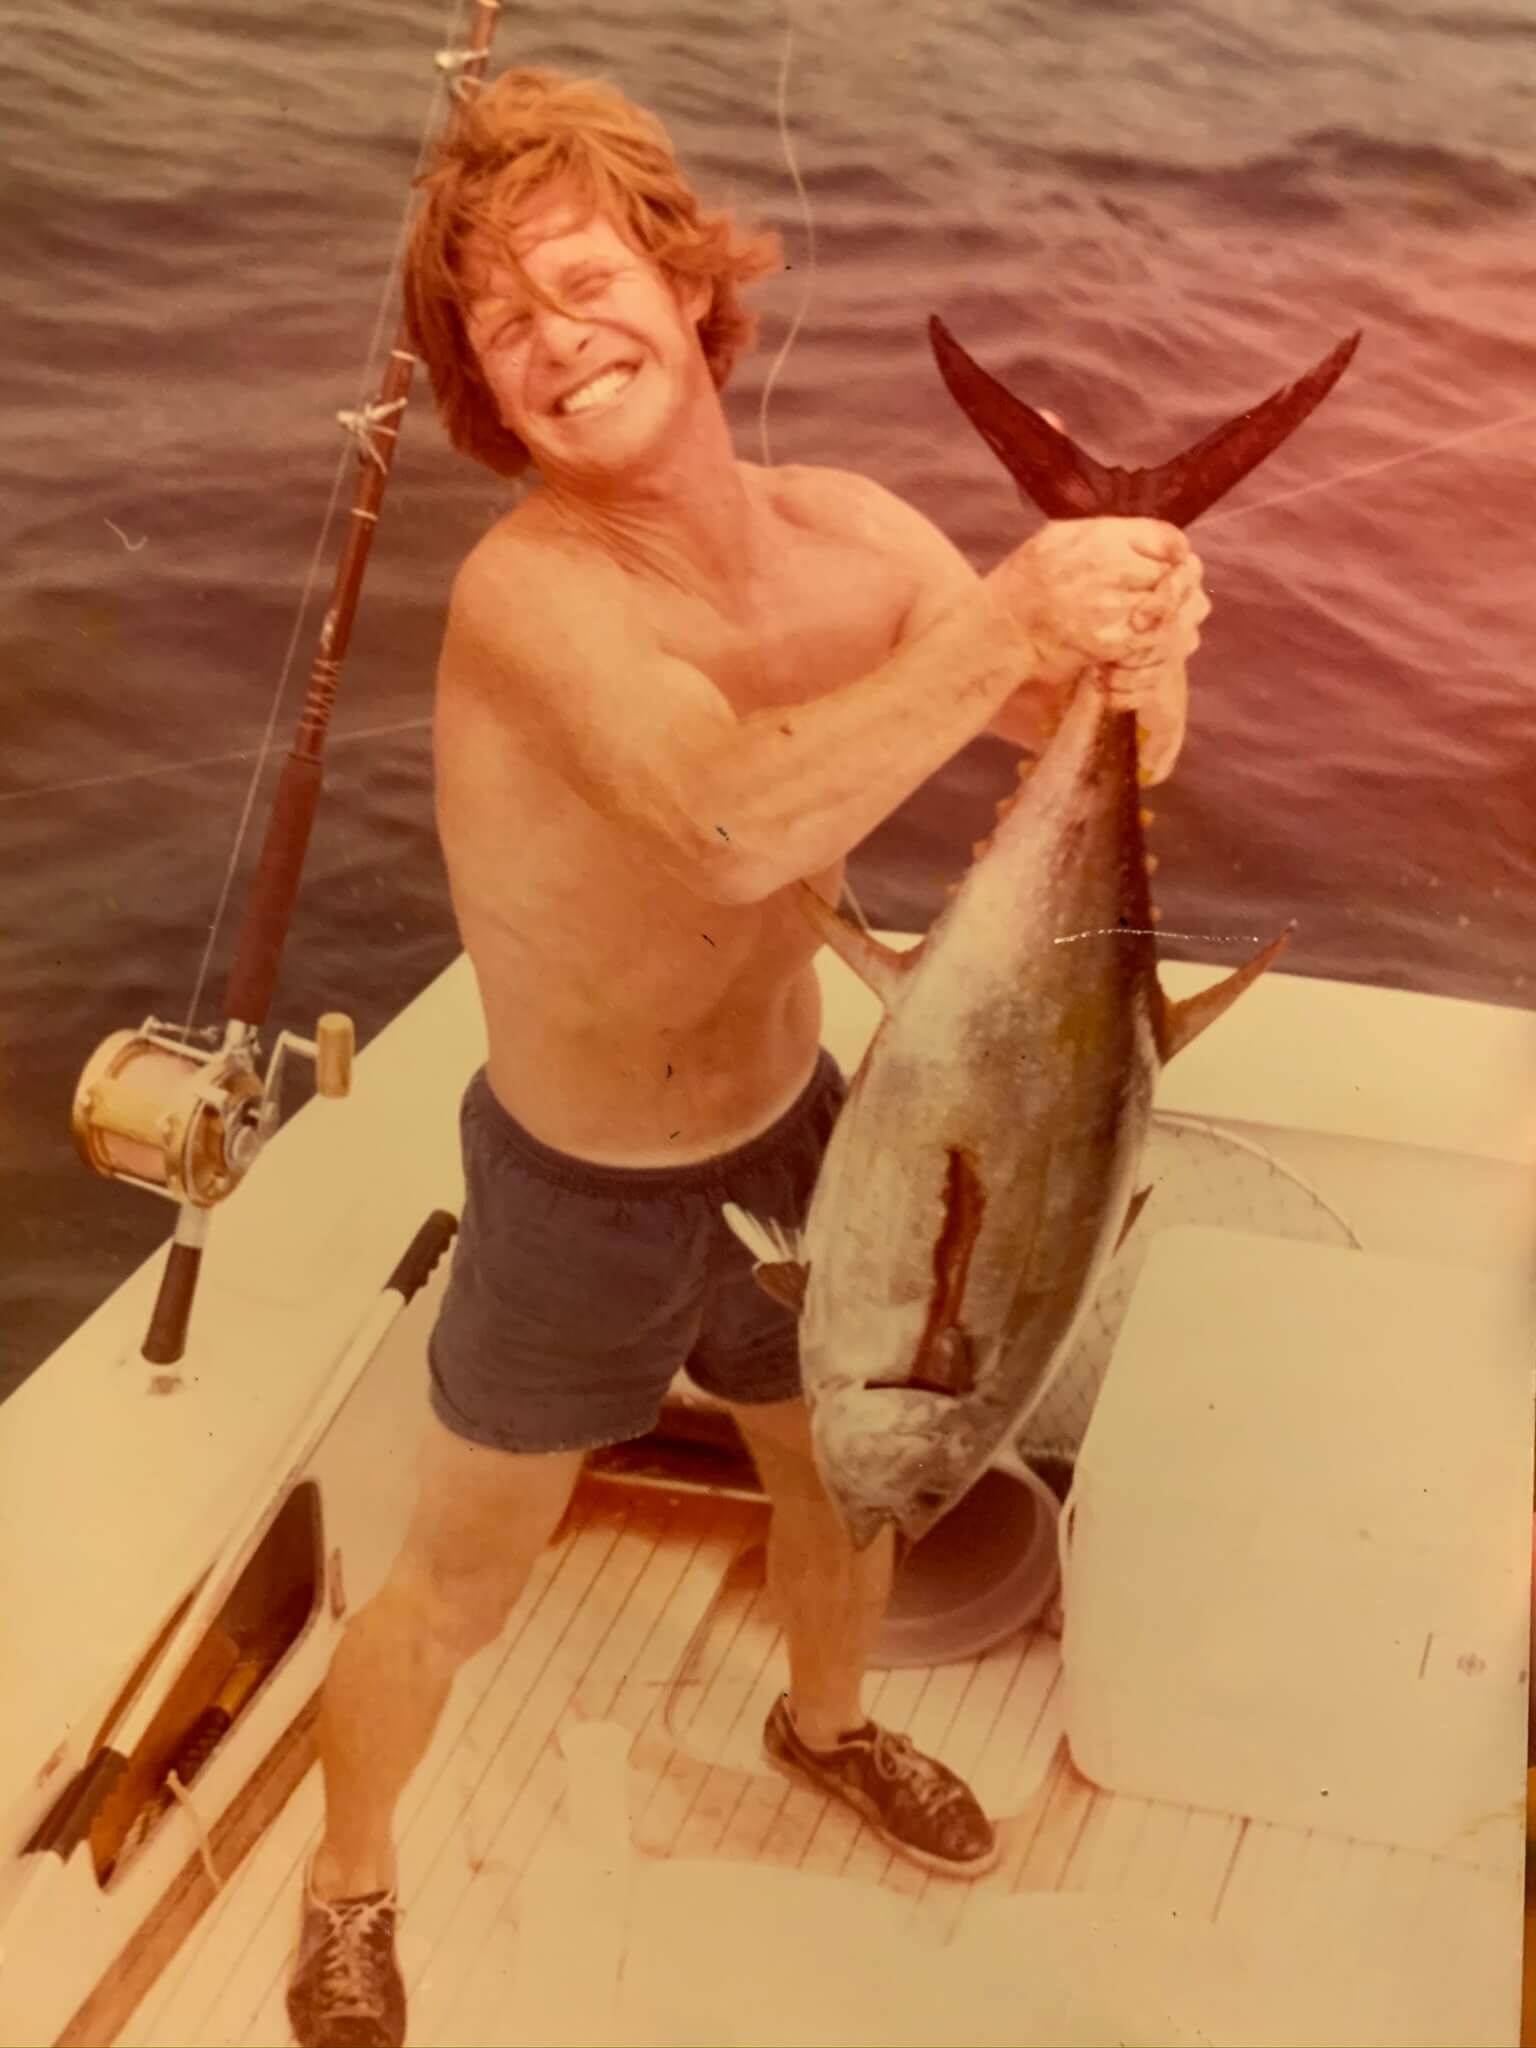 A young Rusty struggling with a heavy catch.